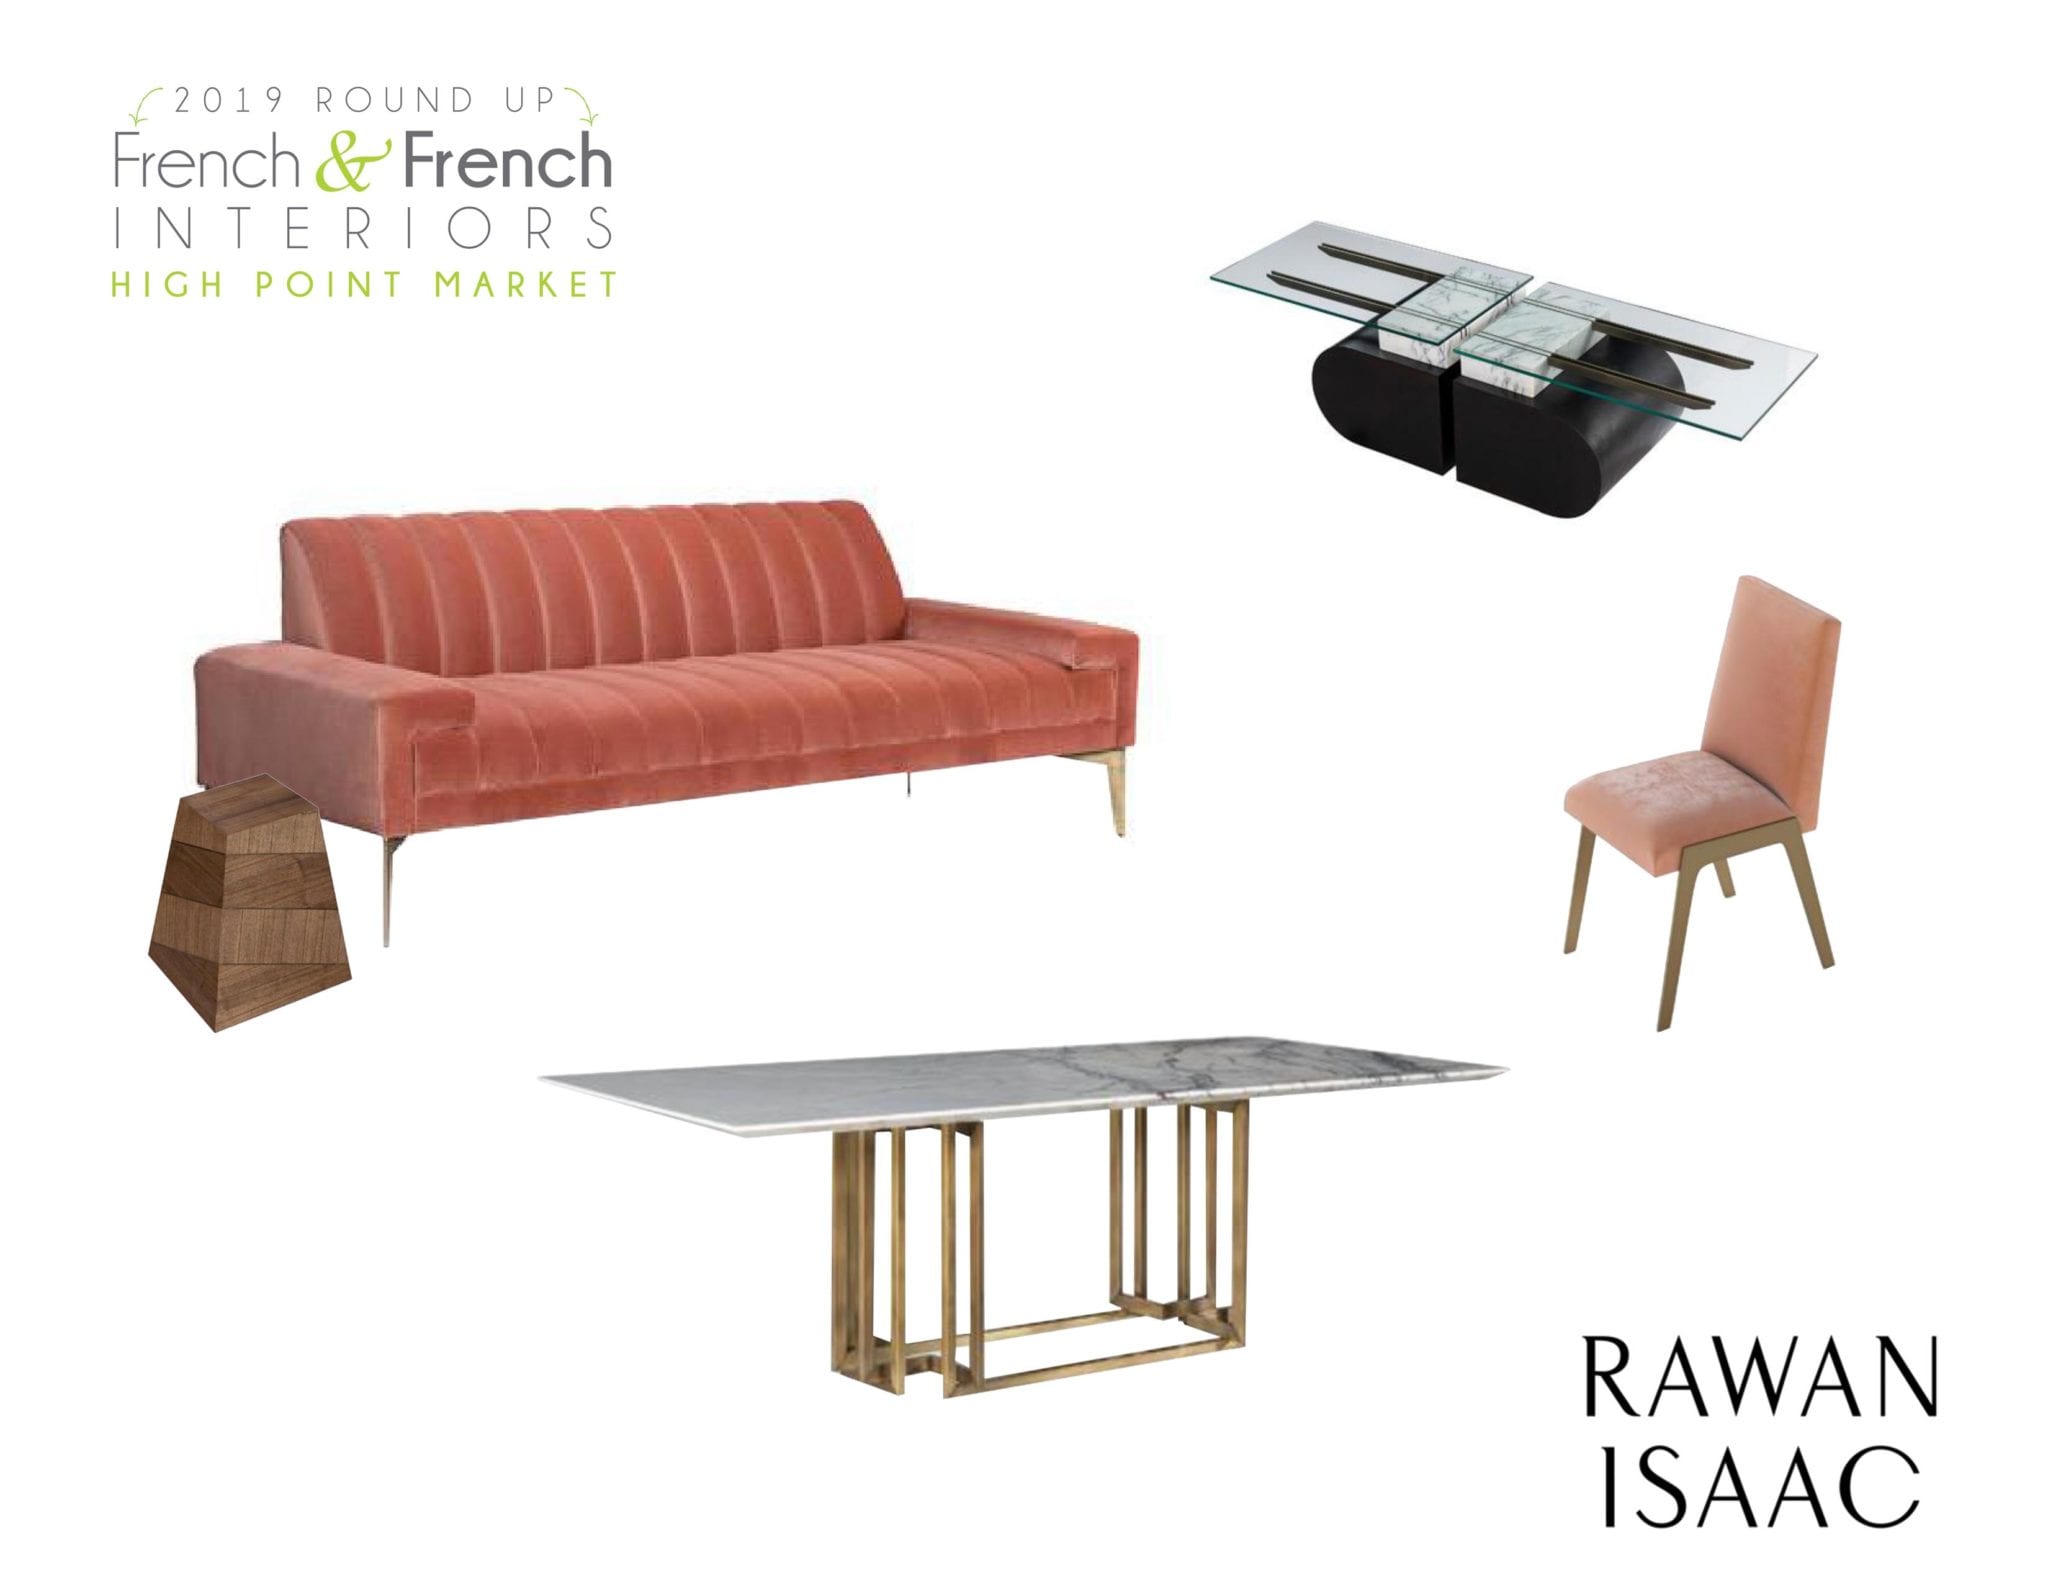 graphic for 2019 Round up from French & French Interiors High Point Market with different furniture items from Rawan Isaac